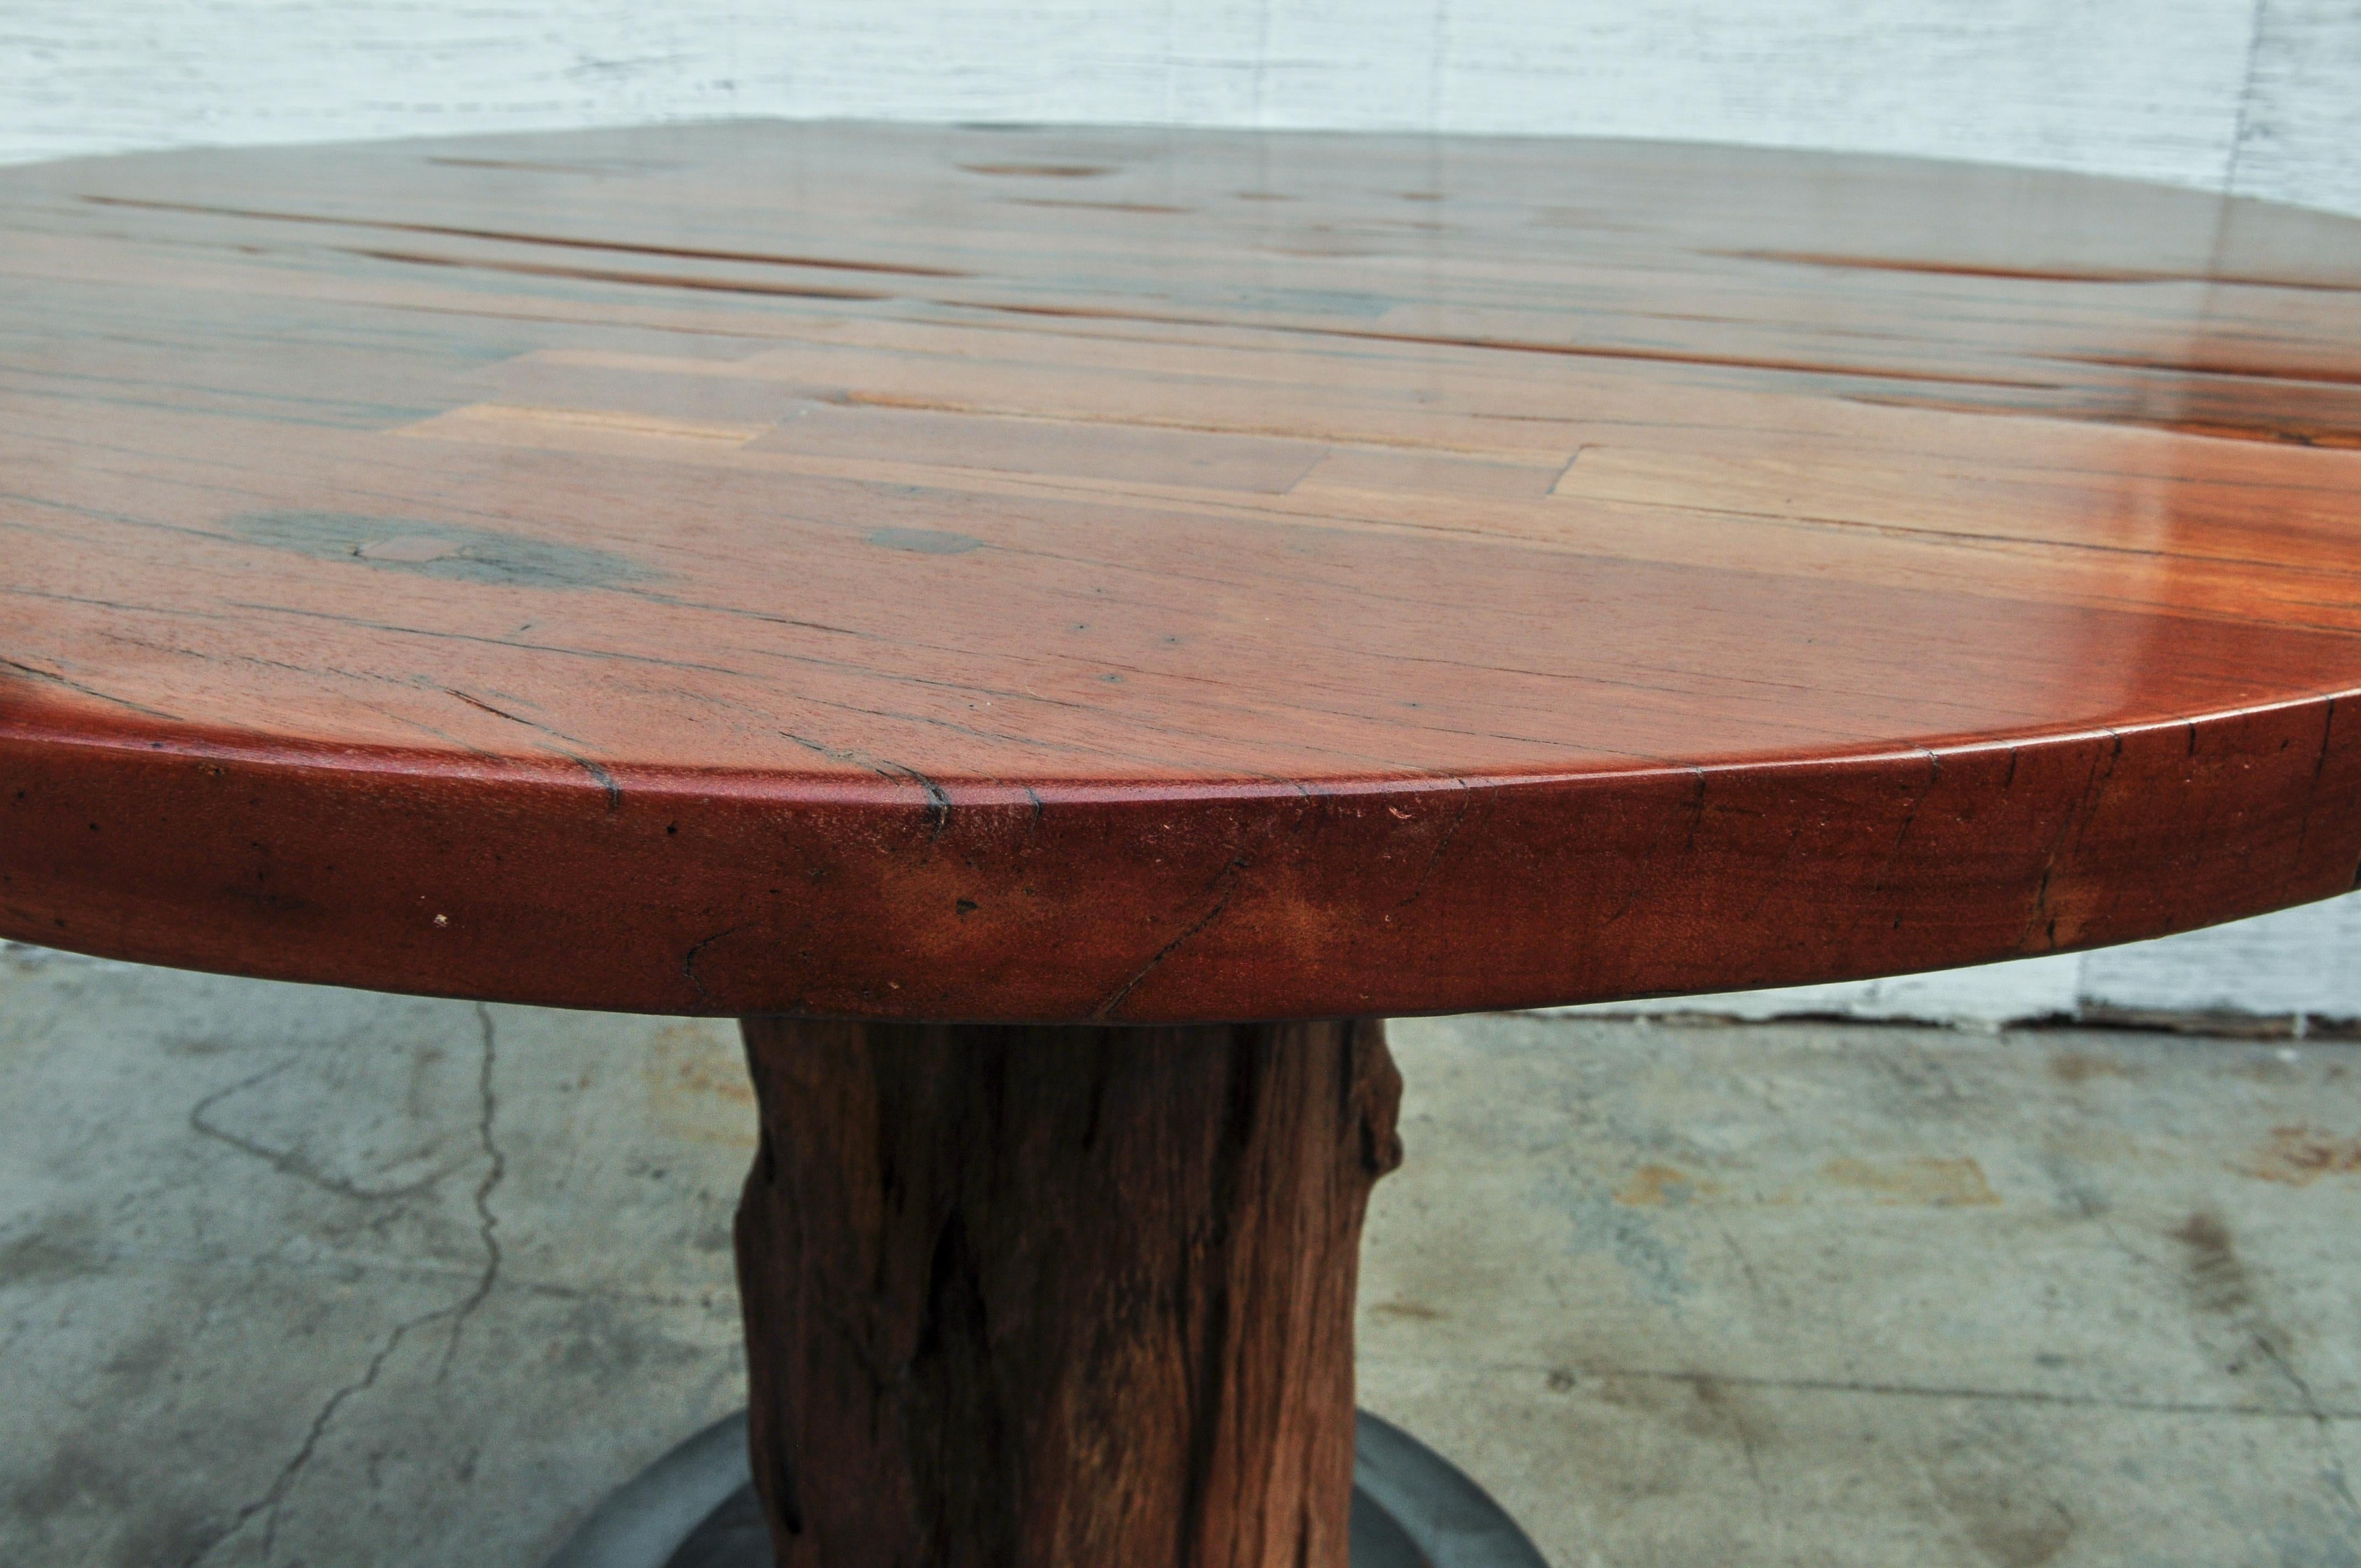 Rustic Round Table Recycled Bridge Wood with Tiered Steel Plate Base 2